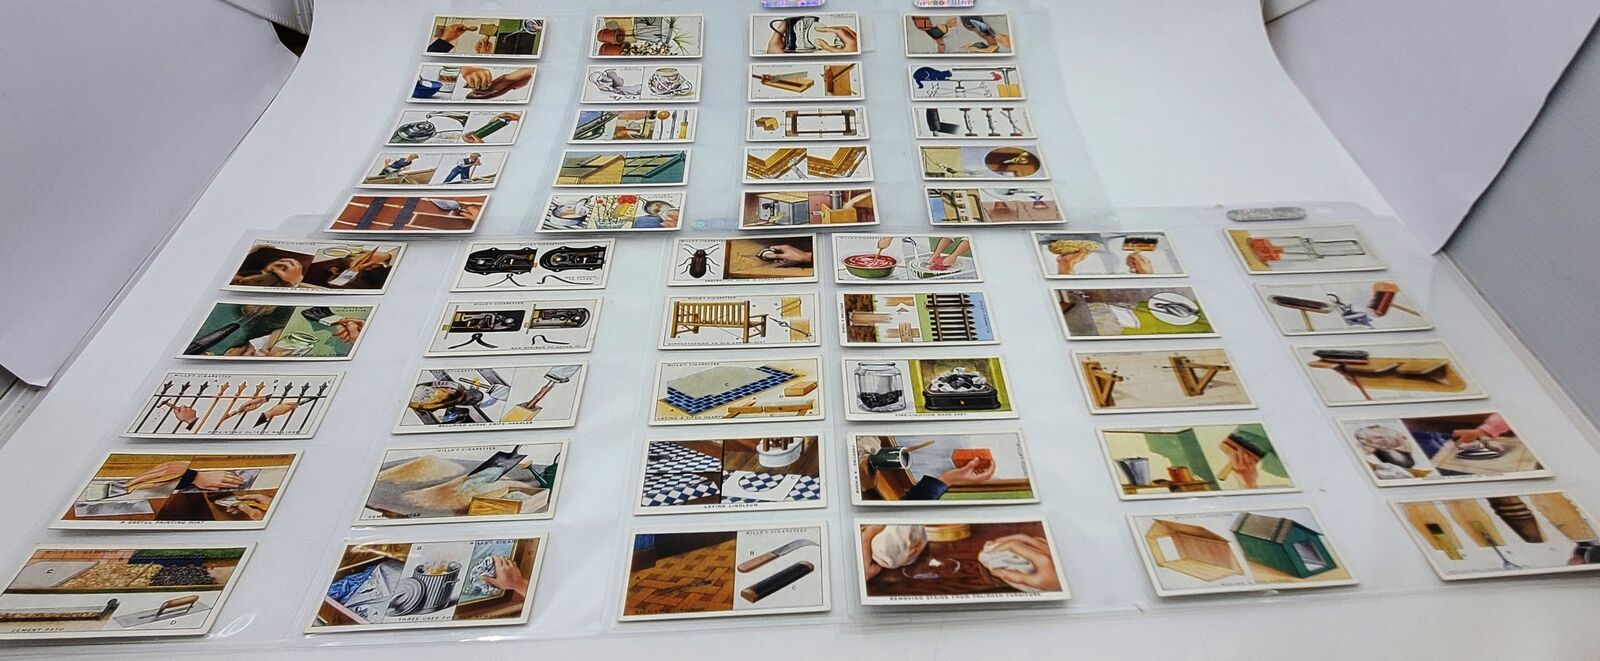 1927 WD & HO Wills Household Hints Cigarettes Tobacco Cigarette Cards  Set of 50